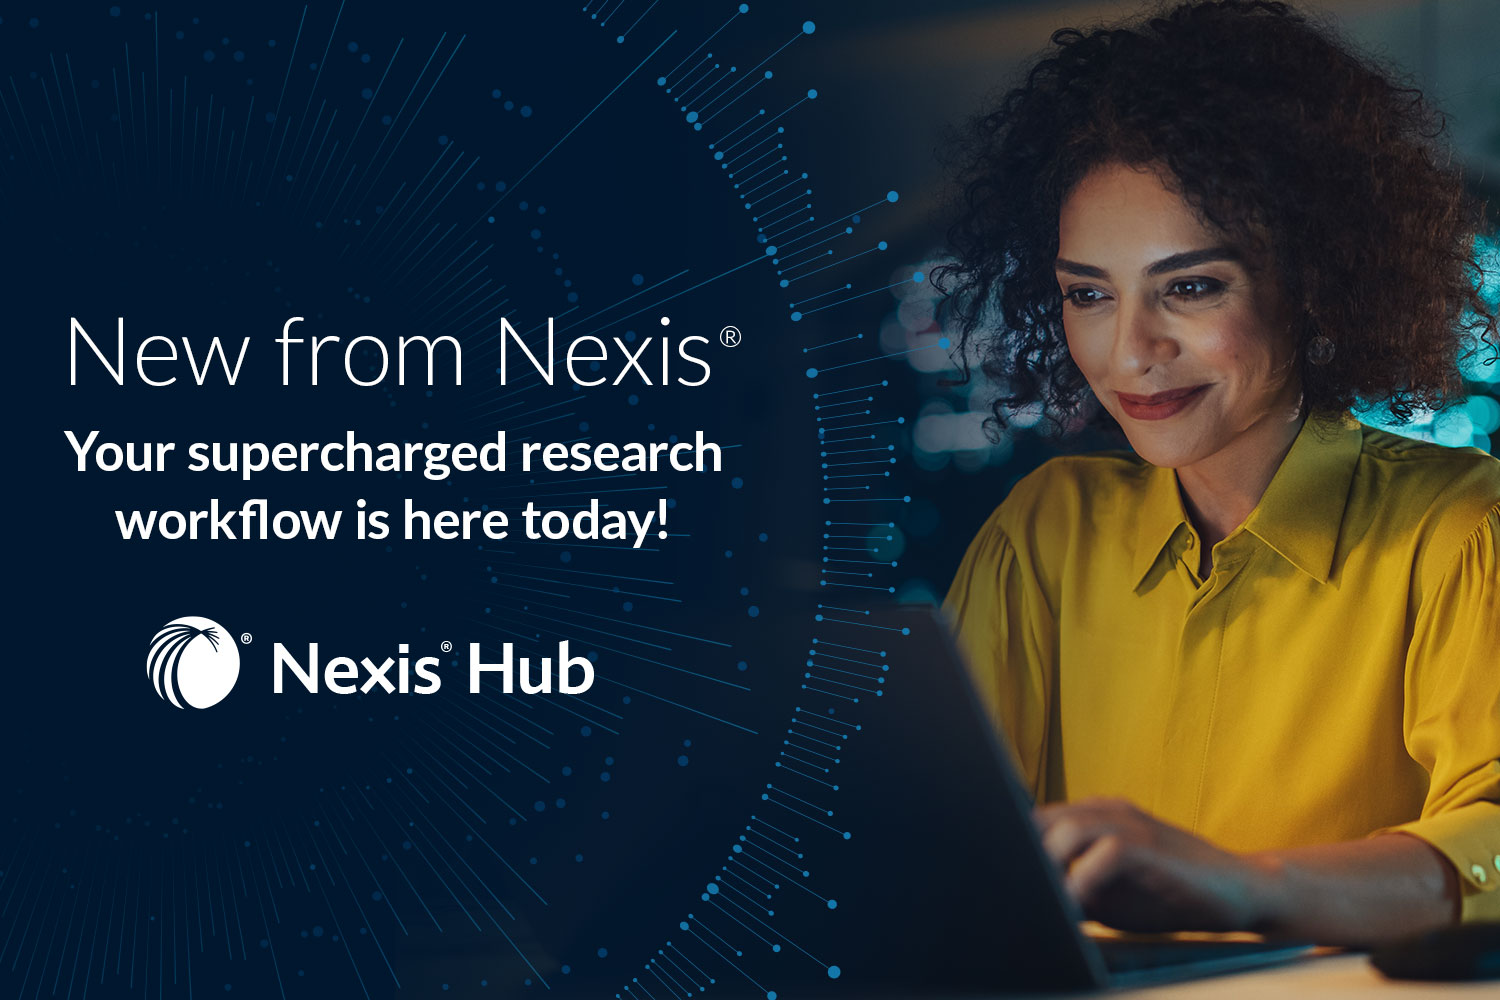 No matter your industry or job title, the ability to find, organize and process information quickly has become an essential skill—and now, this process is easier than ever thanks to Nexis Hub.